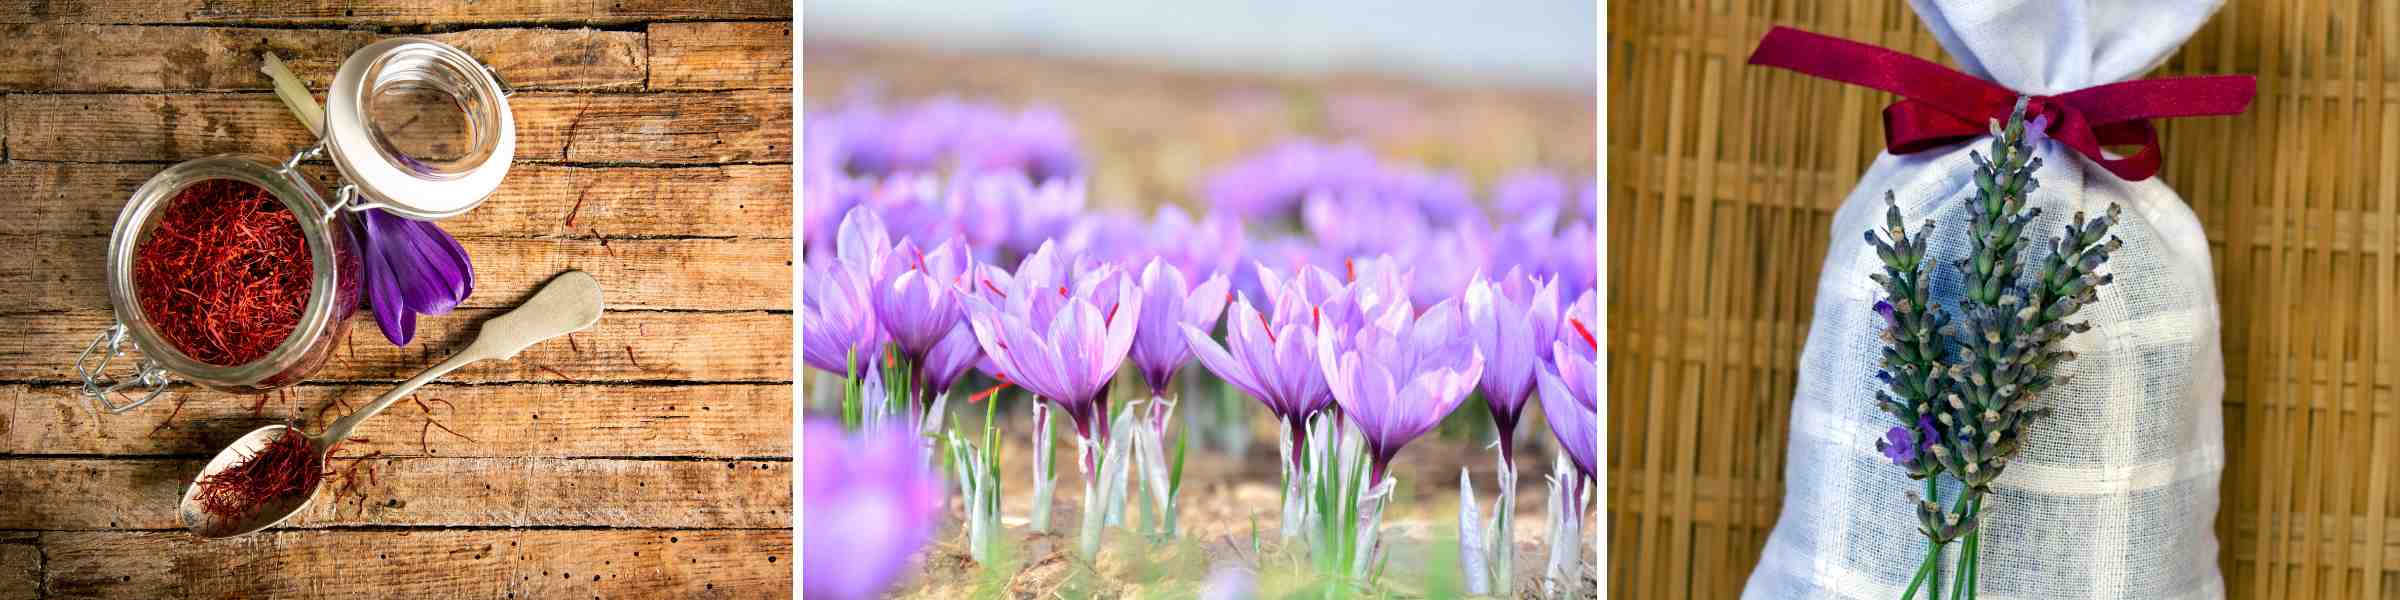 Gardening and Home Décor for Saffron